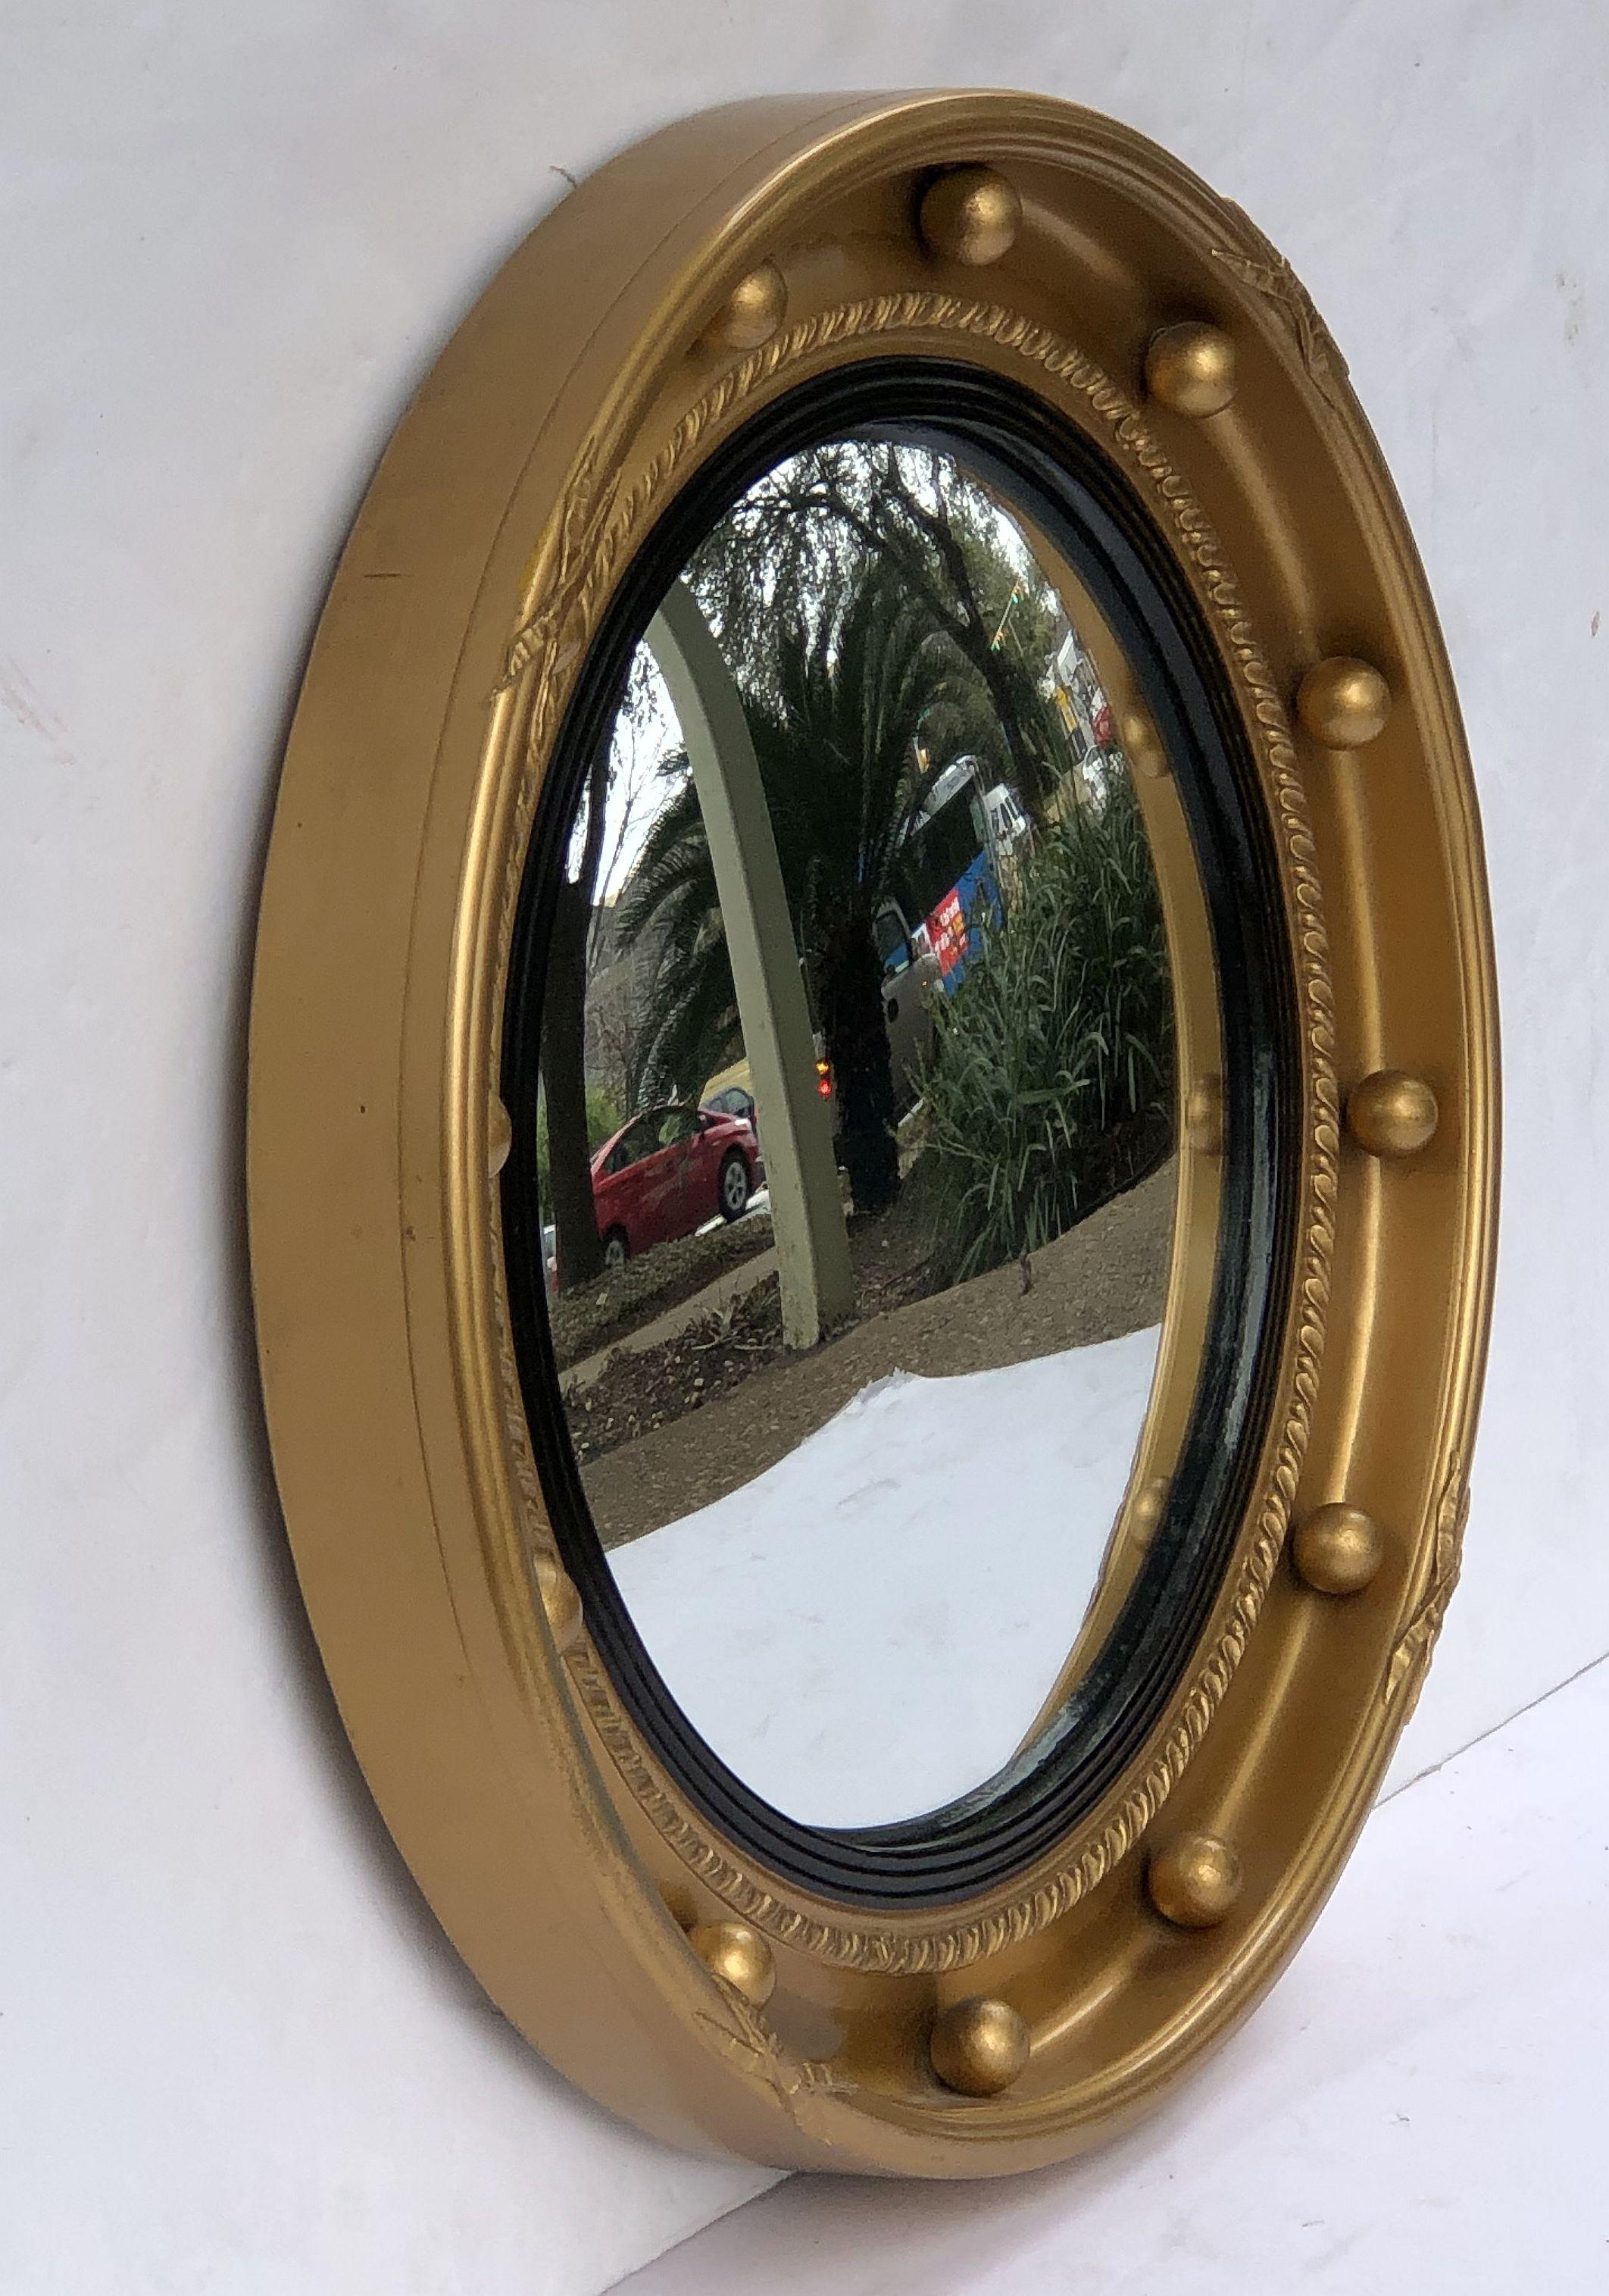 A fine English round or circular convex mirror featuring a Regency design of a moulded gilt frame and ebonized trim, with gilt balls around the circumference.

Dimensions: Diameter 16 inches x depth 1 3/4 inches.
 